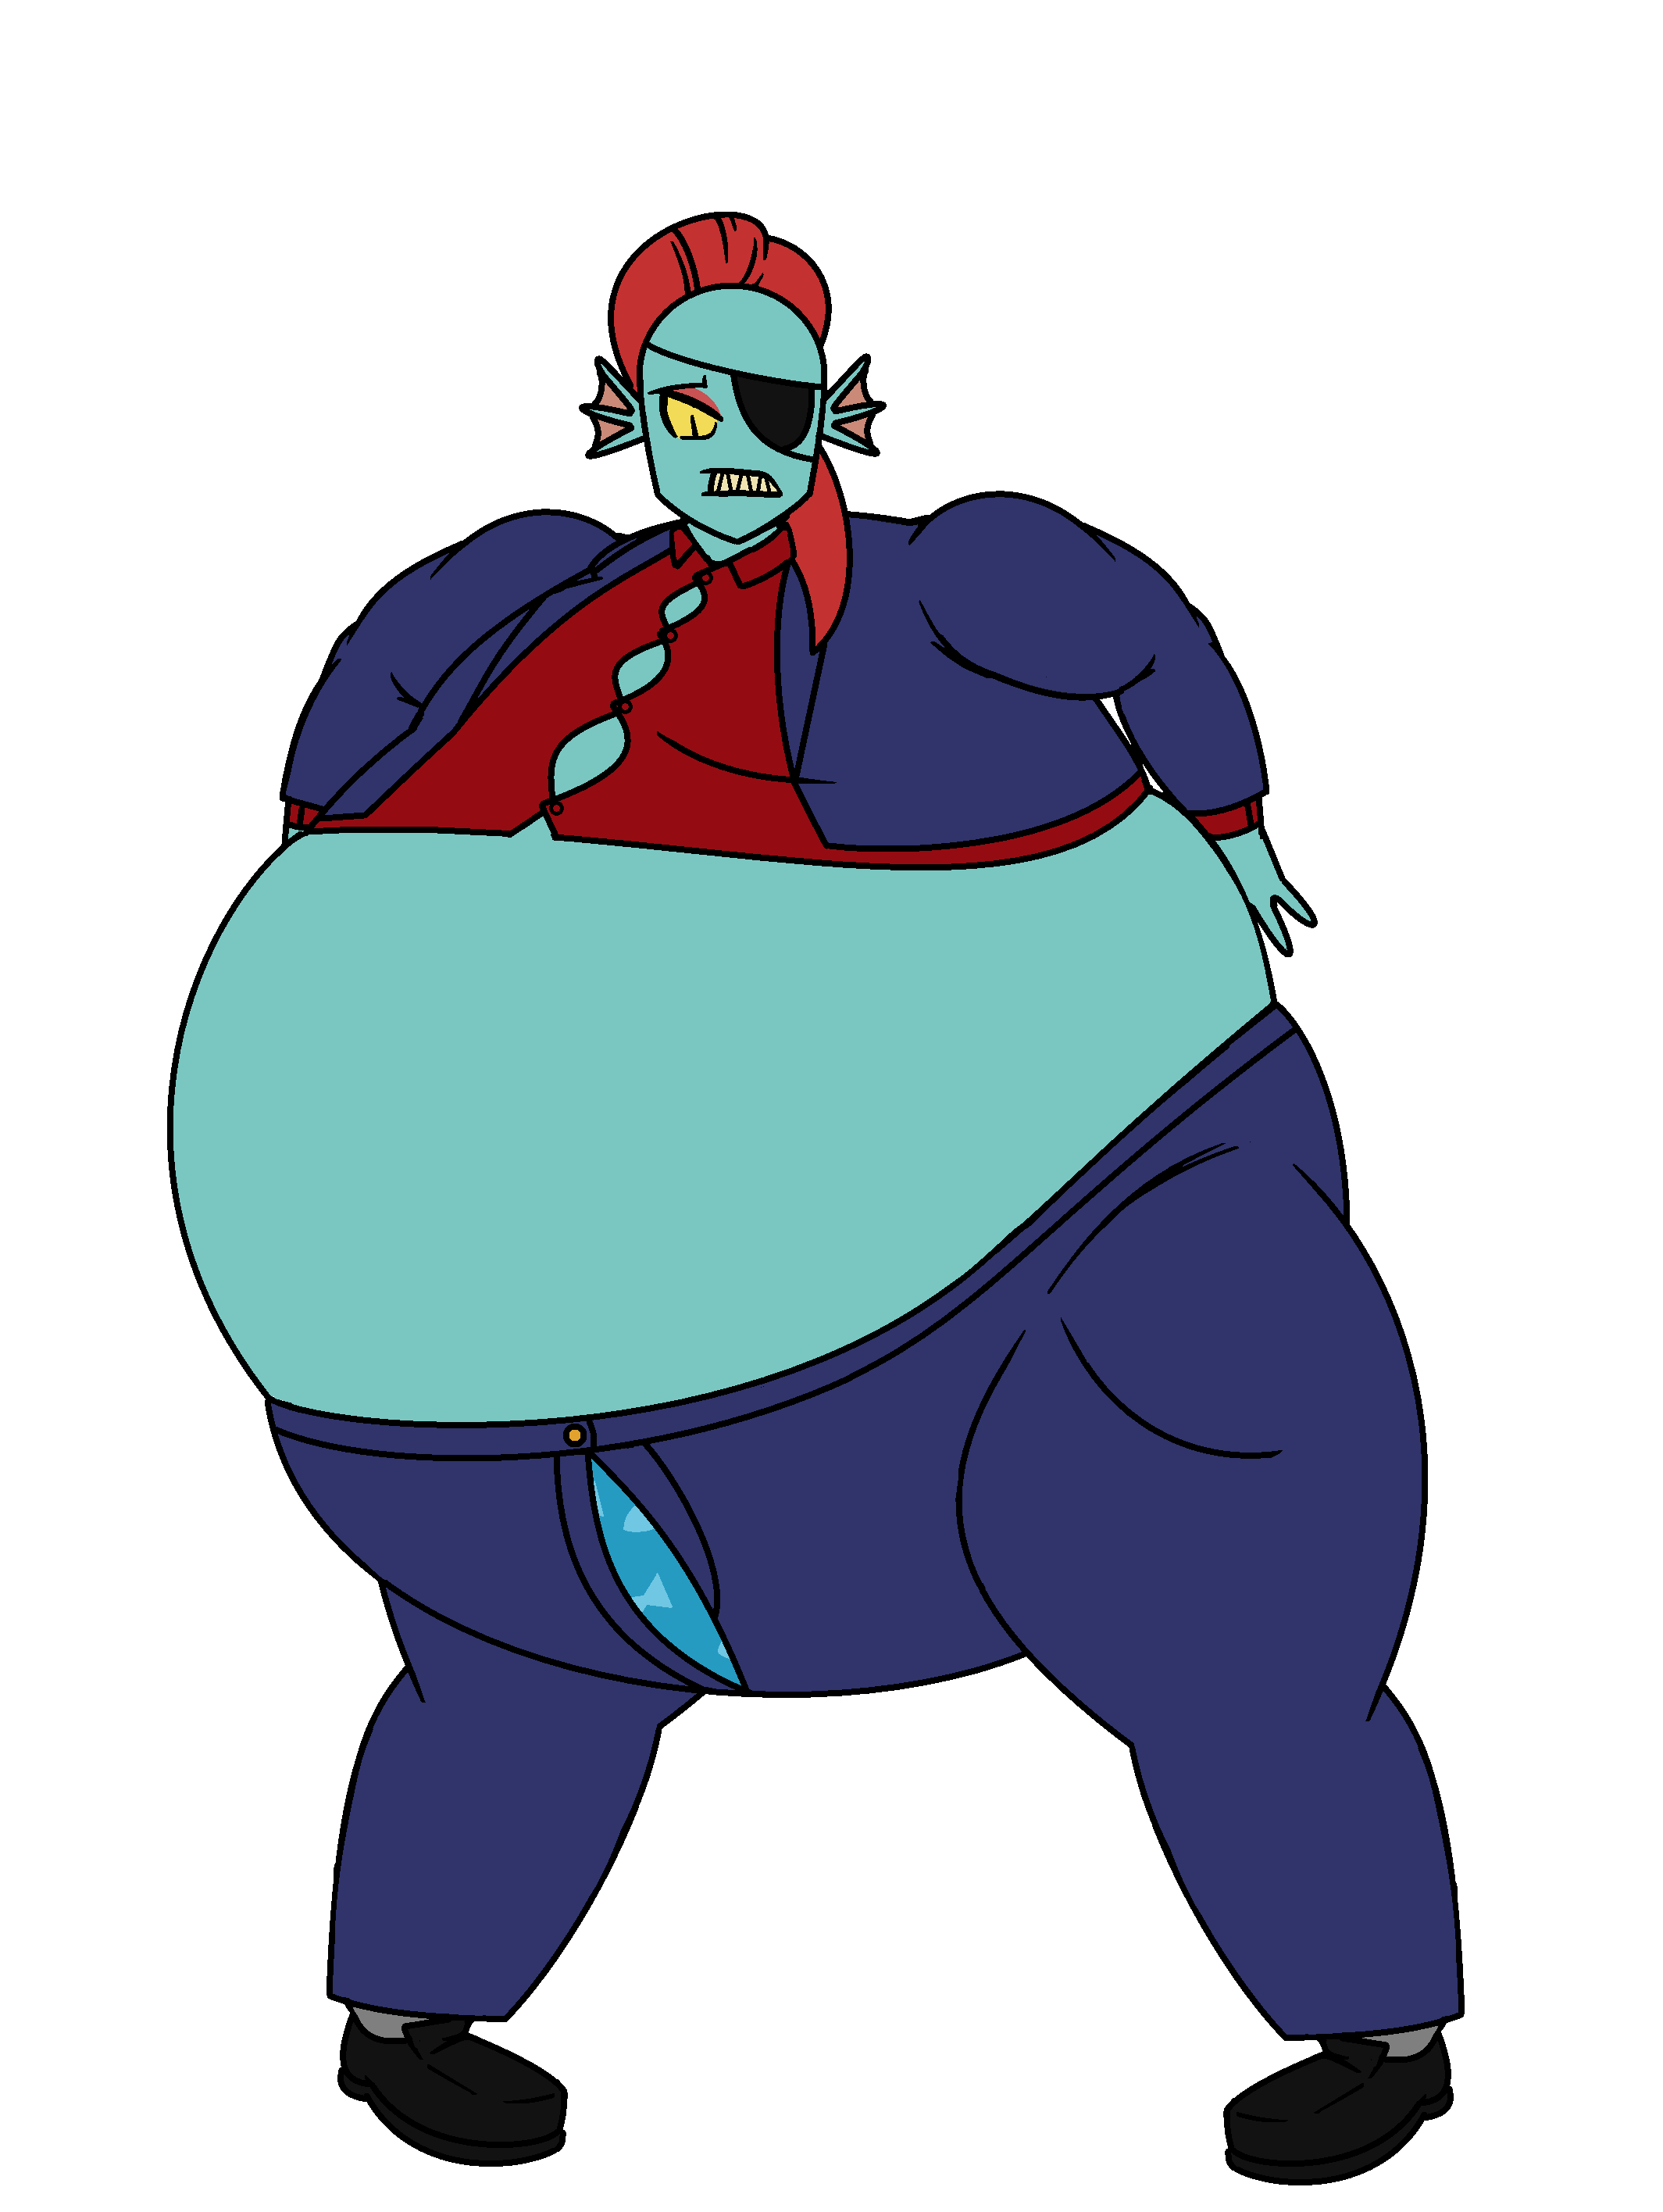 Undyne Inflation Images Reverse Search.